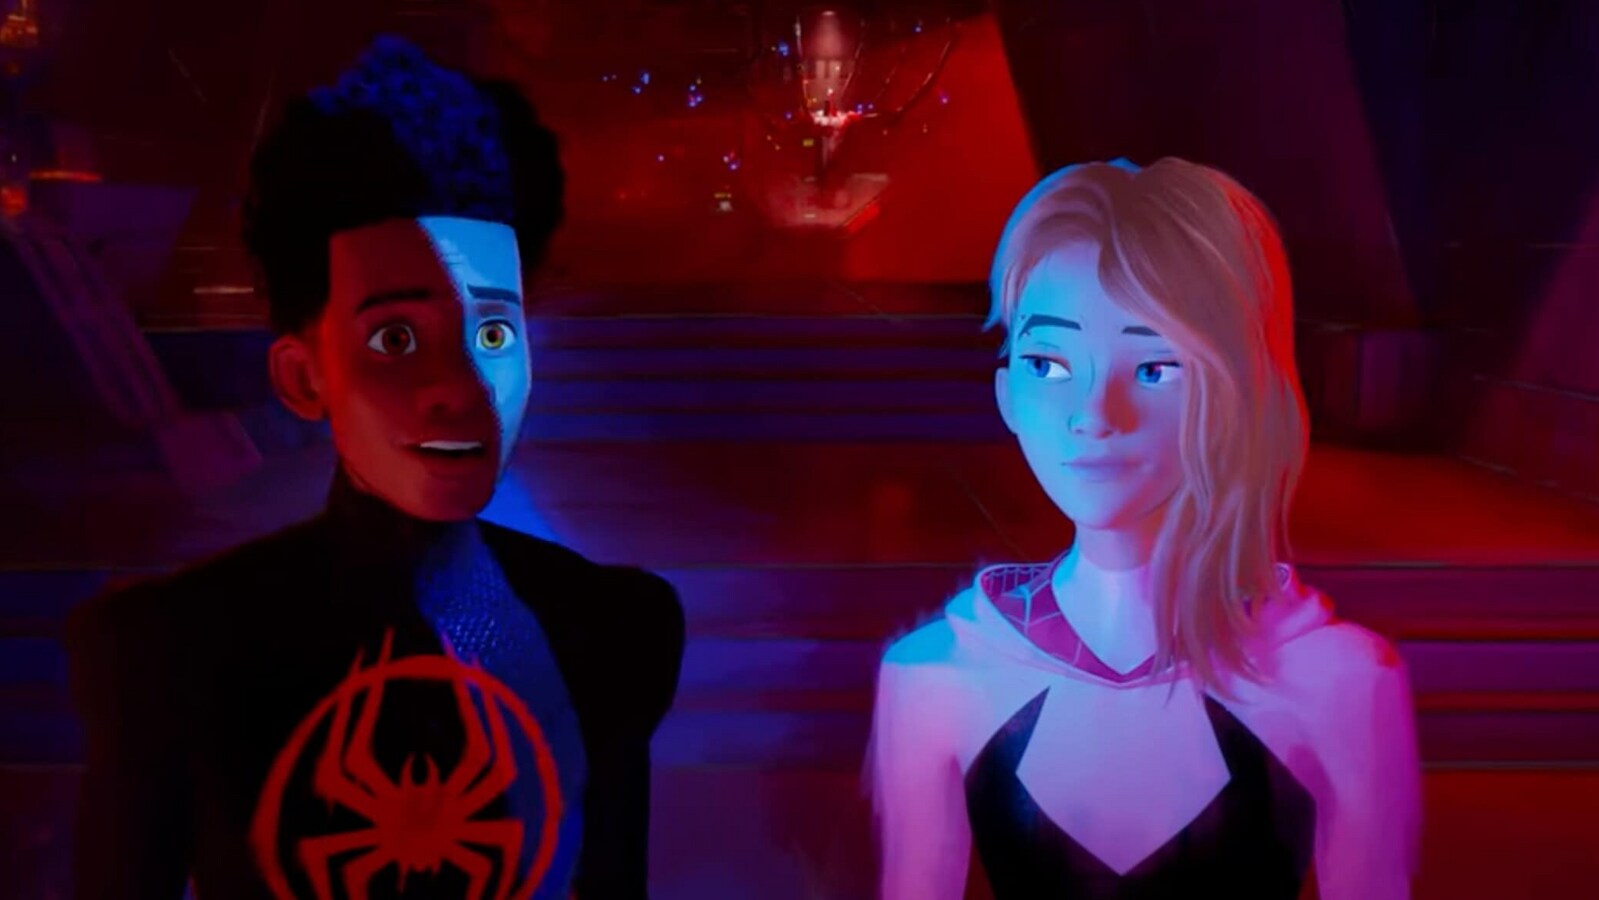 Spider-Man Across the Spider-Verse has a mature plot, is just not a ‘kid’s film’, says senior animator